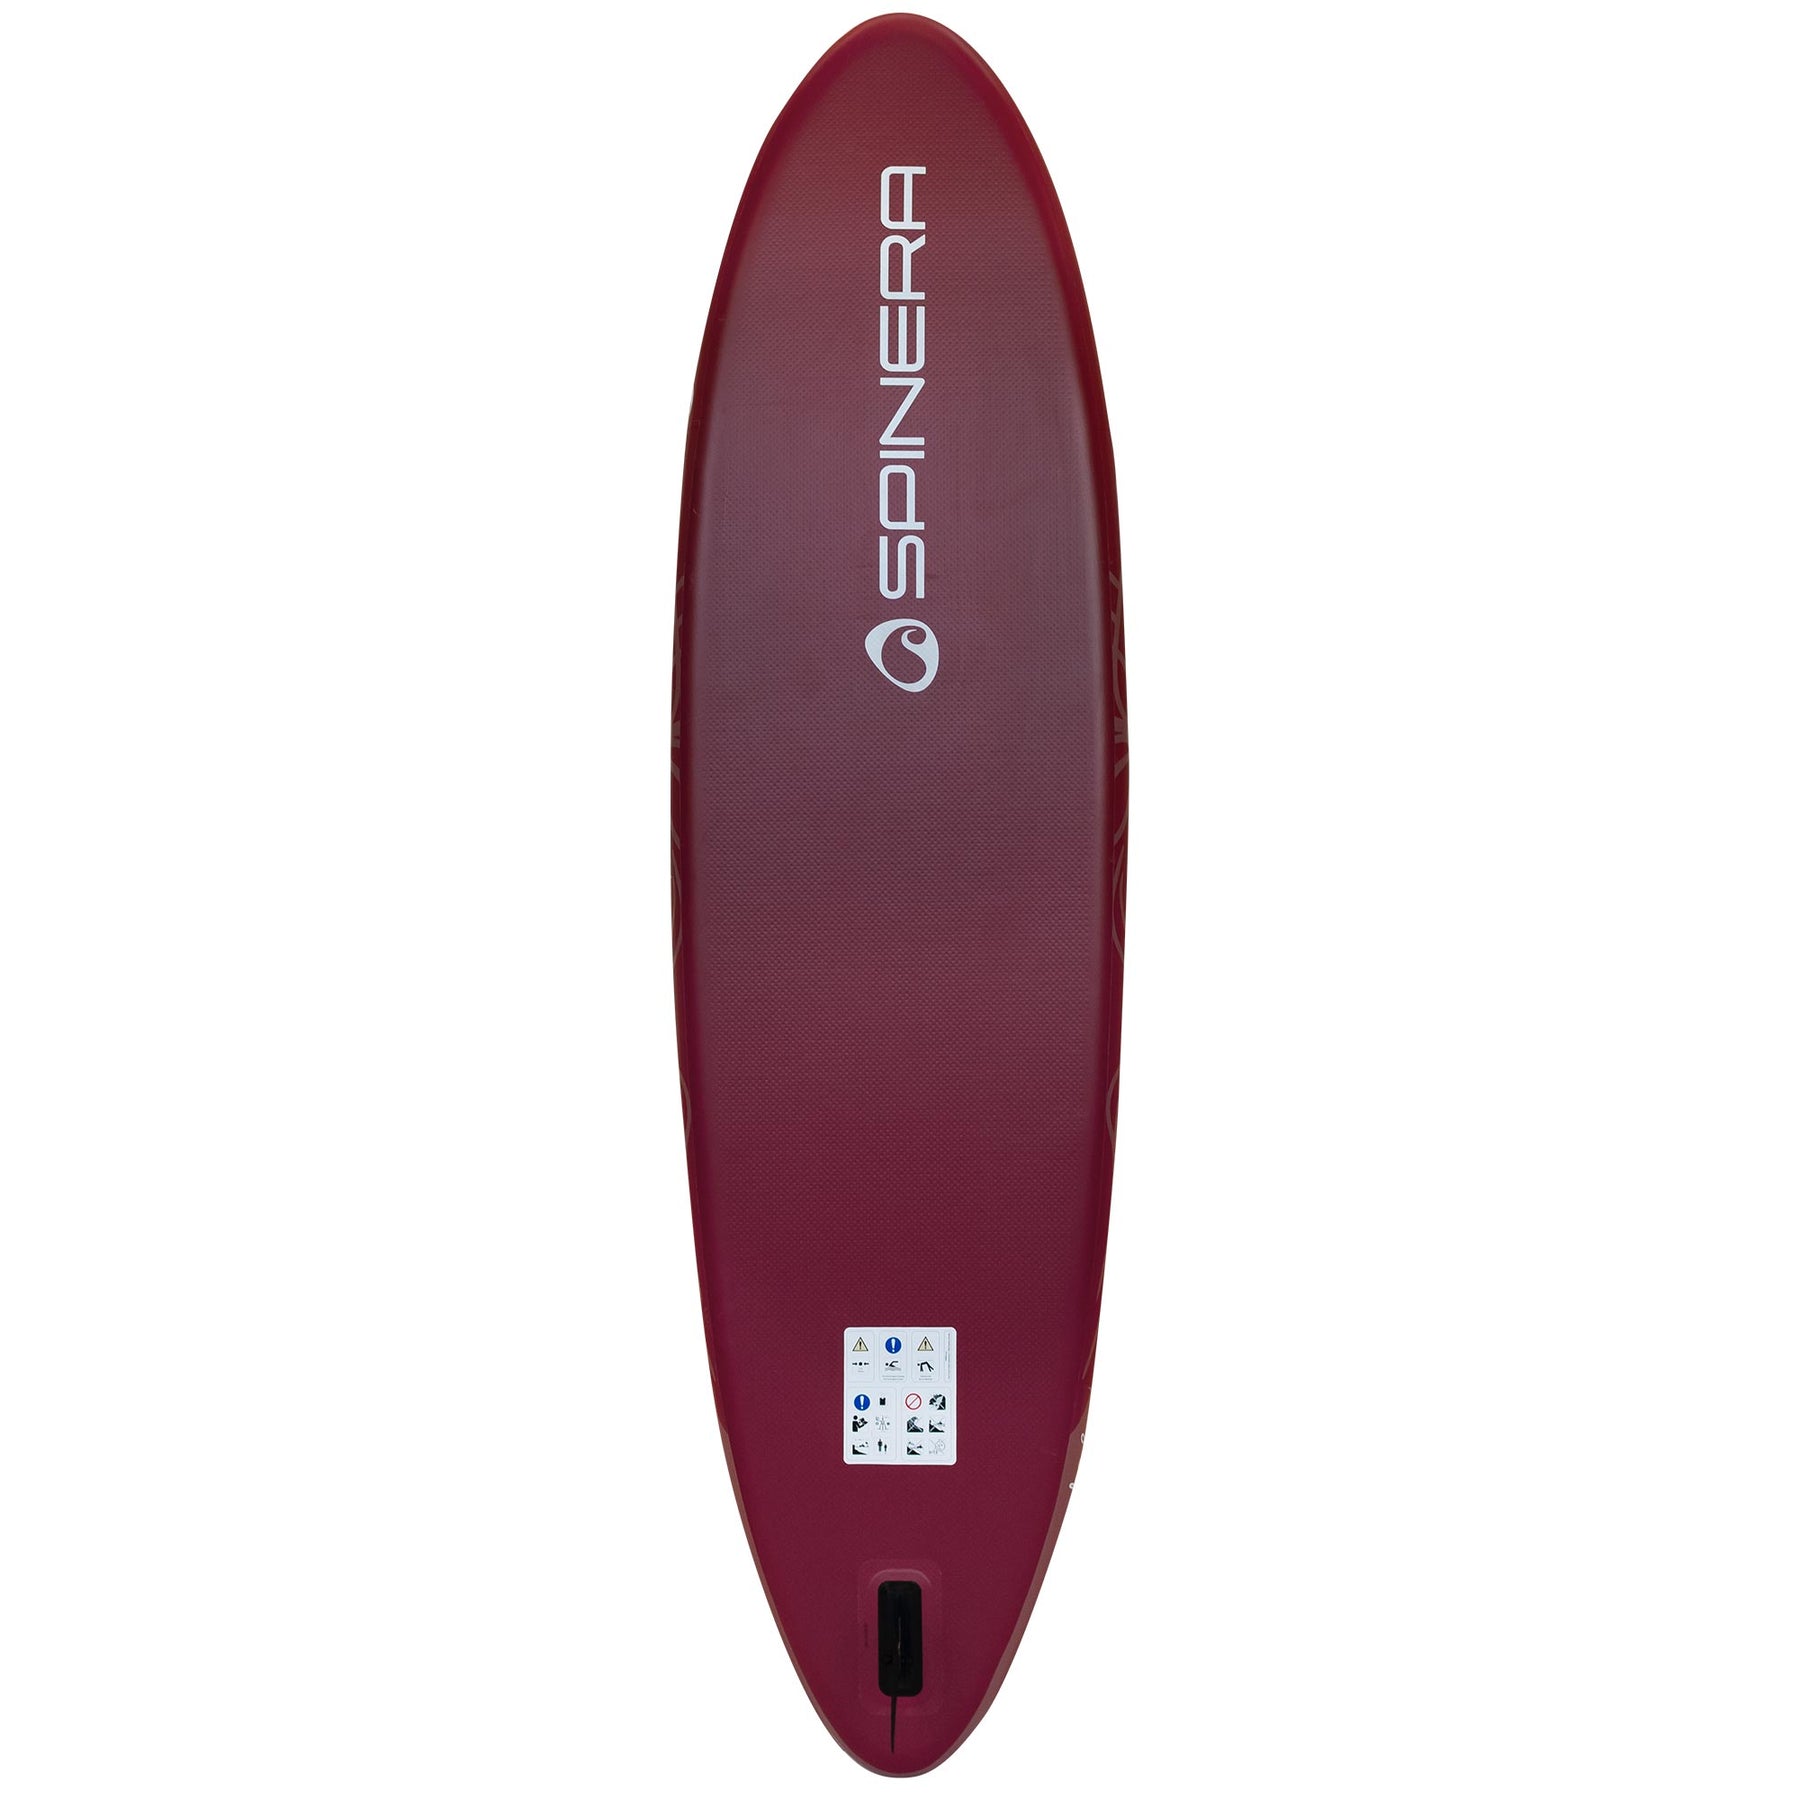 Spinera 10 Ft Inflatable Yoga Paddle Board - The Suprana Yoga